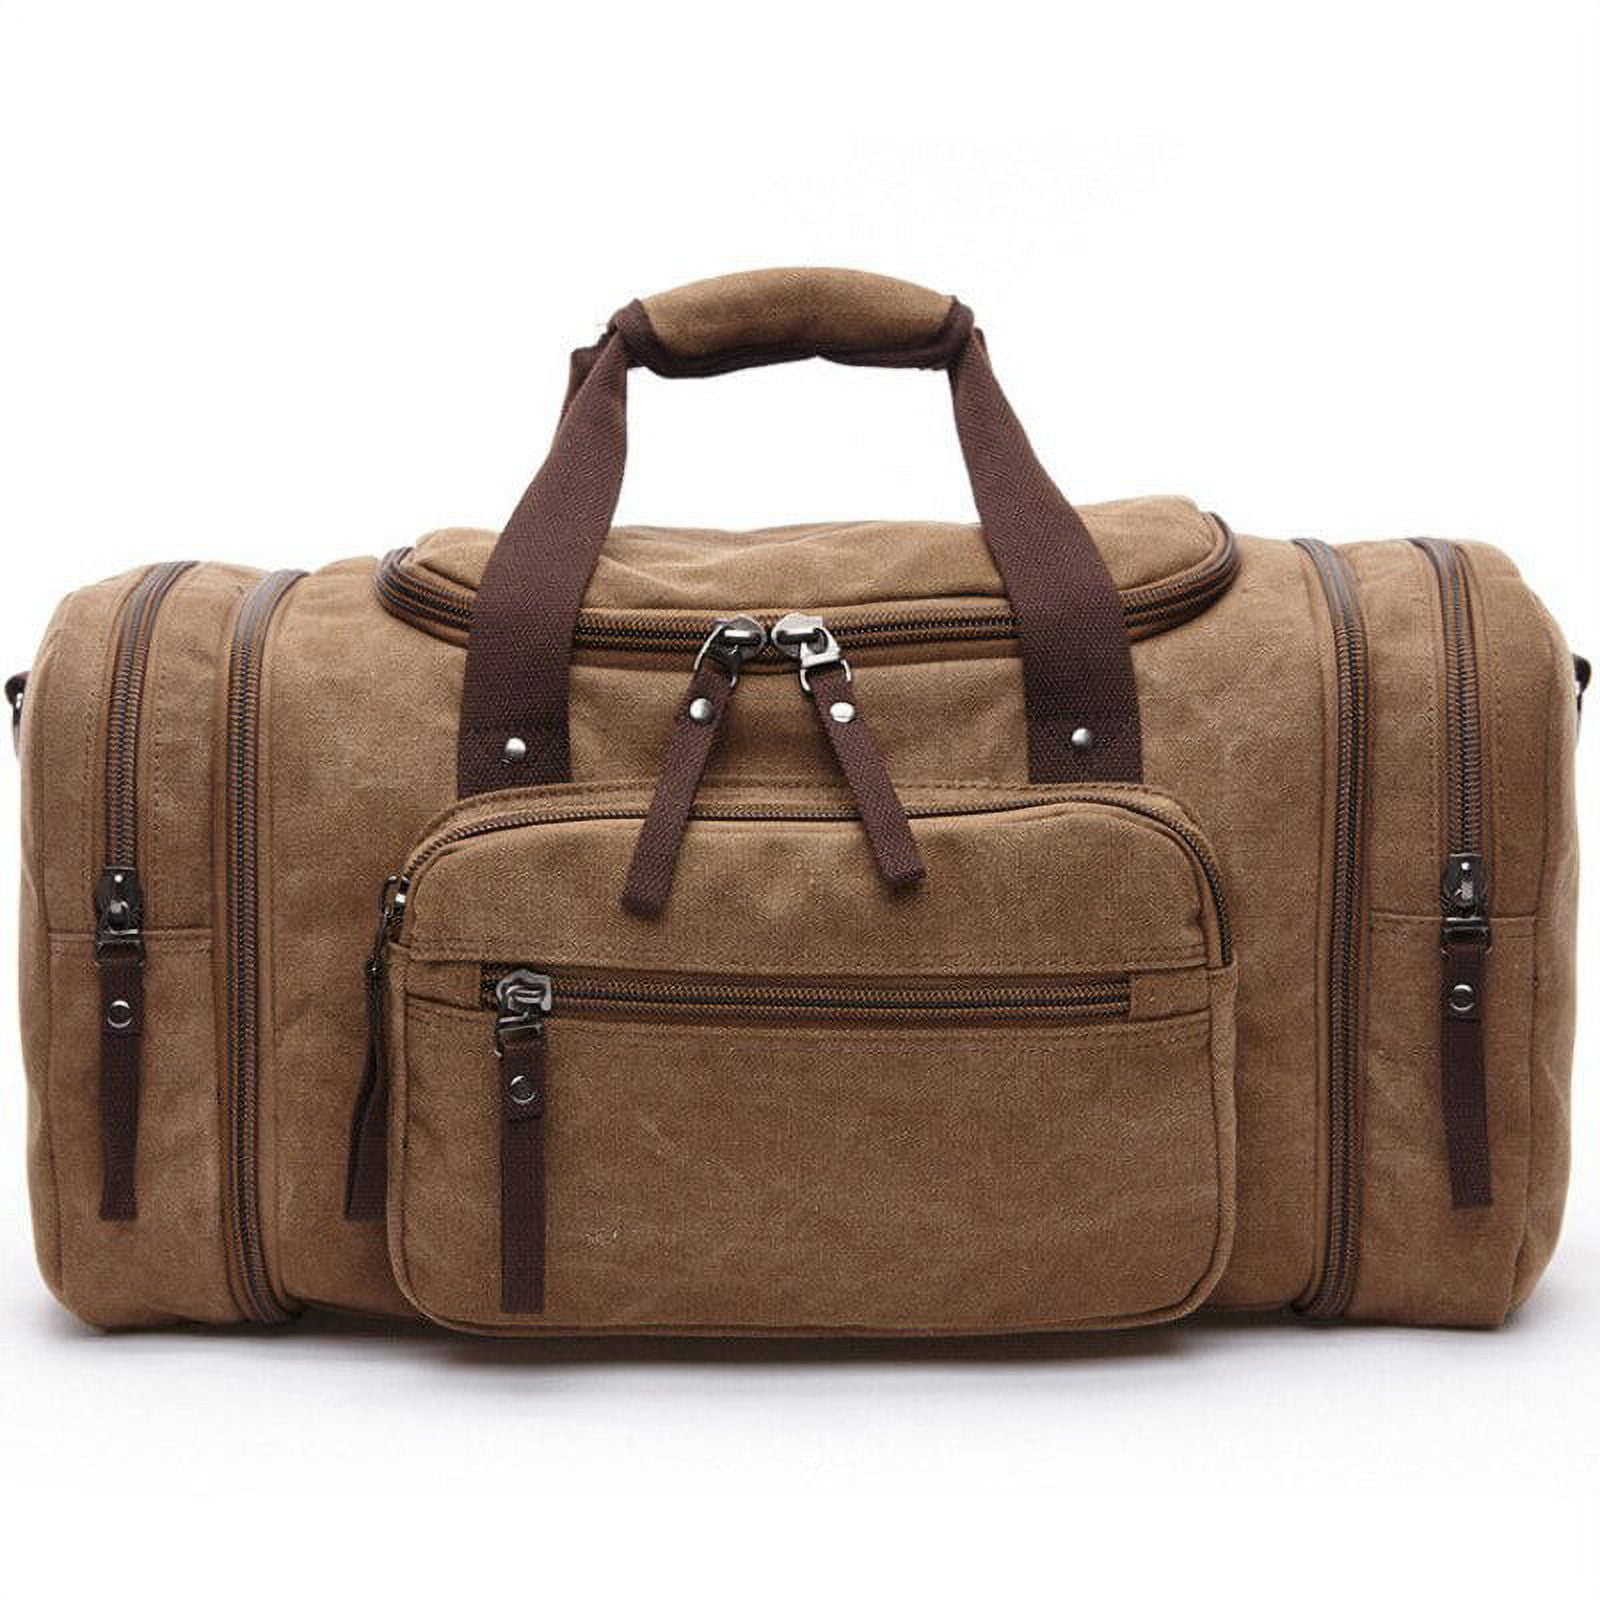 Amazon.com: Sxdthy Large Capacity Men Hand Luggage Travel Duffle Bags  Canvas Travel Bags Weekend Shoulder Bags (Color : B, Size : 53 * 30 * 25cm)  : Clothing, Shoes & Jewelry